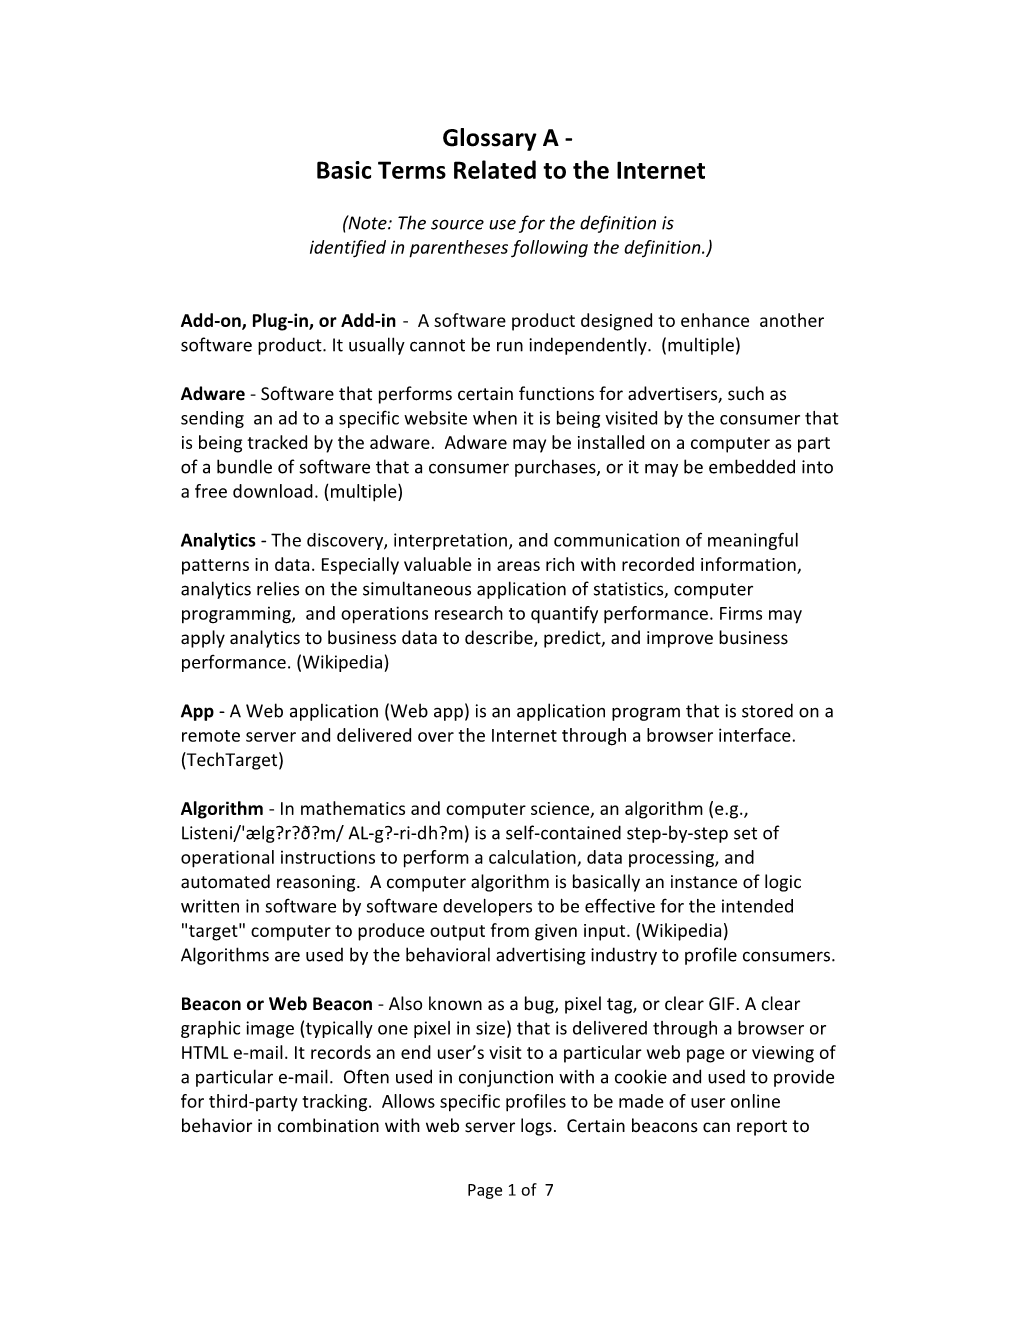 Glossary a - Basic Terms Related to the Internet